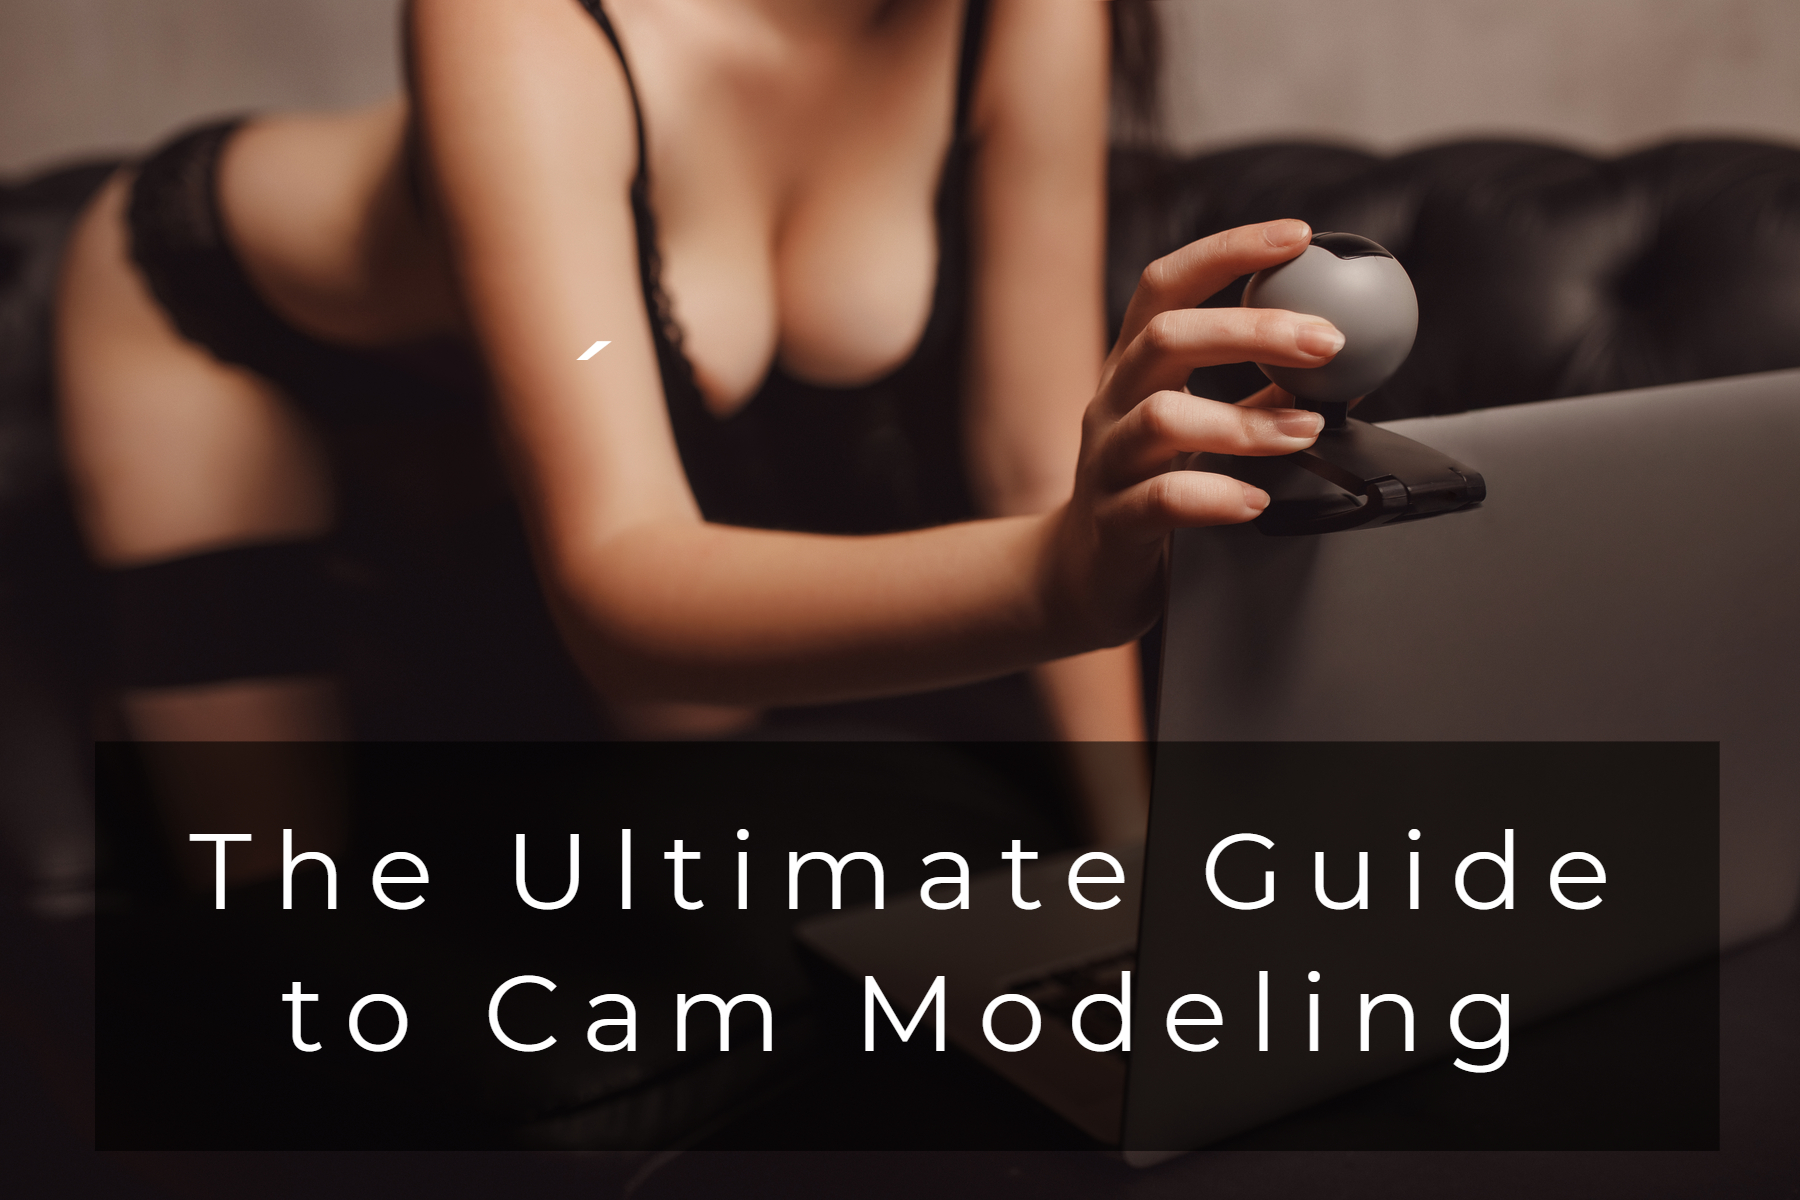 The Only Guide to How To Secretly Become A Webcam Girl - Meiya Tokyo Usa